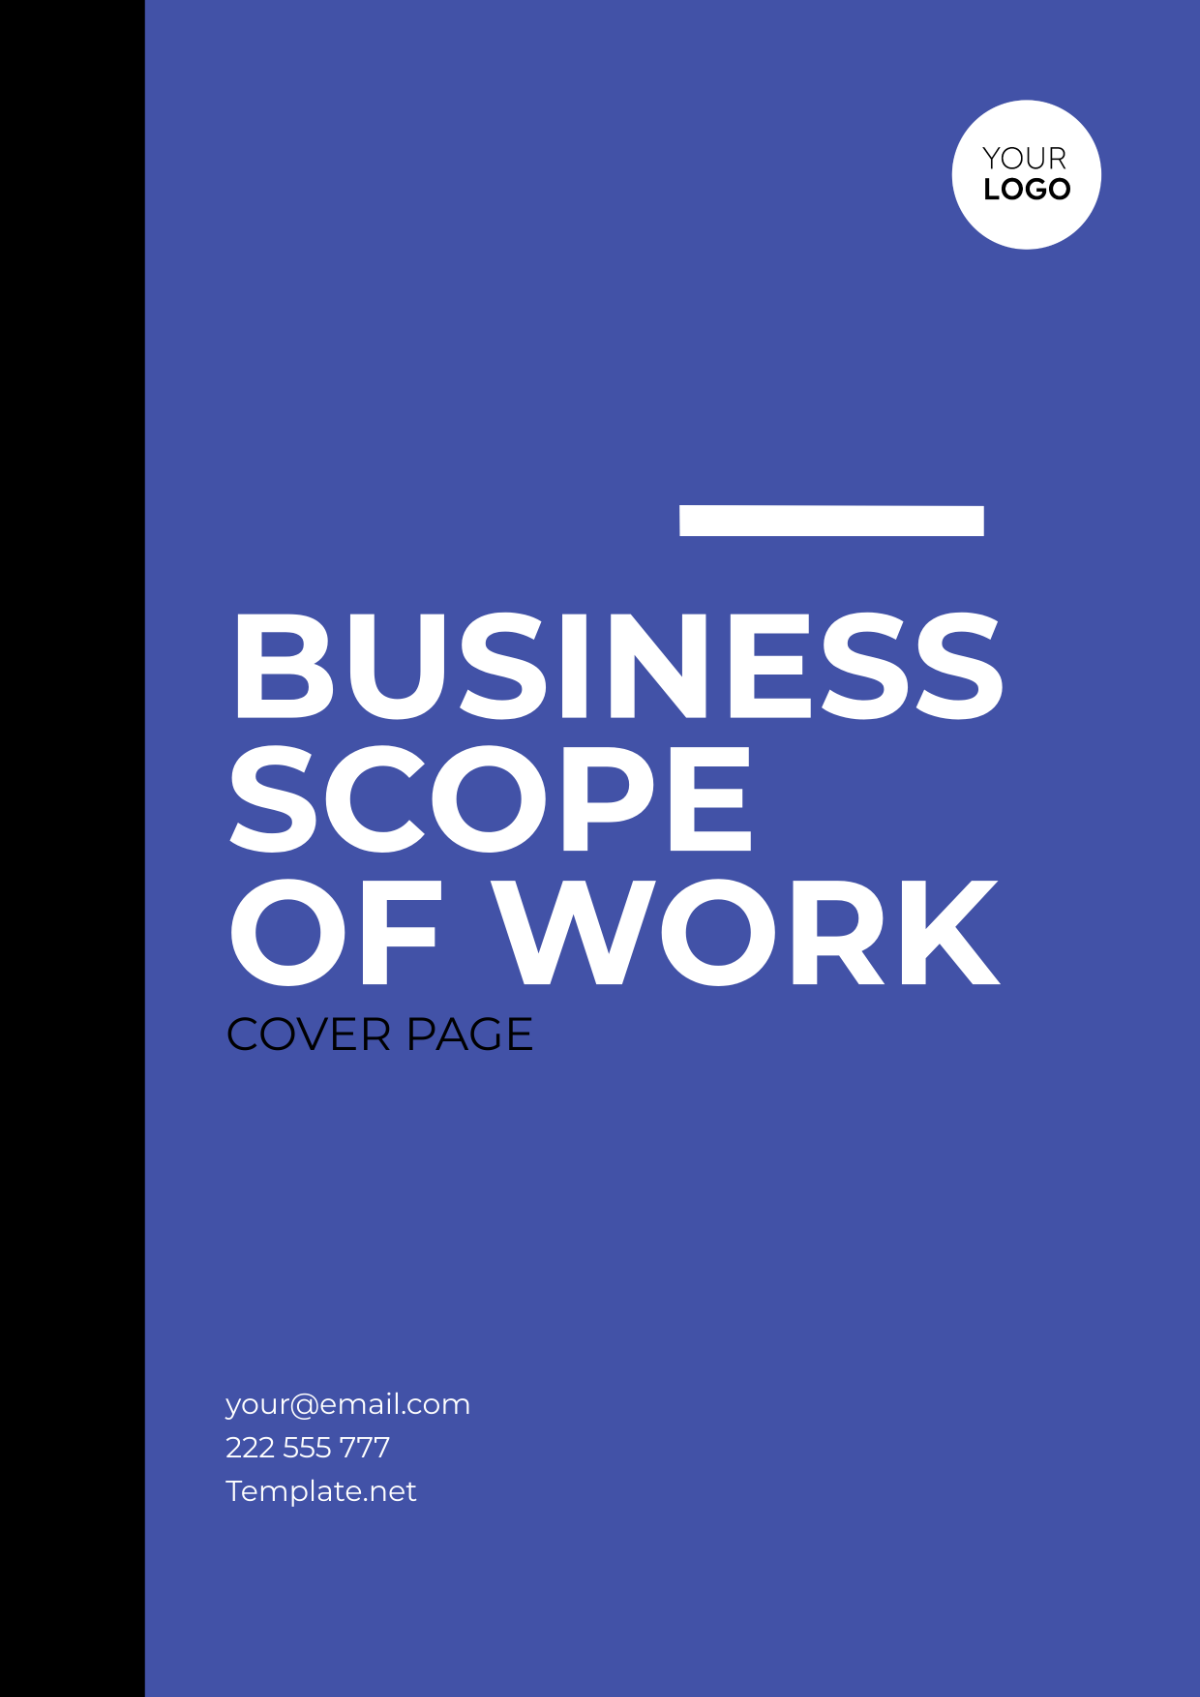 Business Scope of Work Cover Page